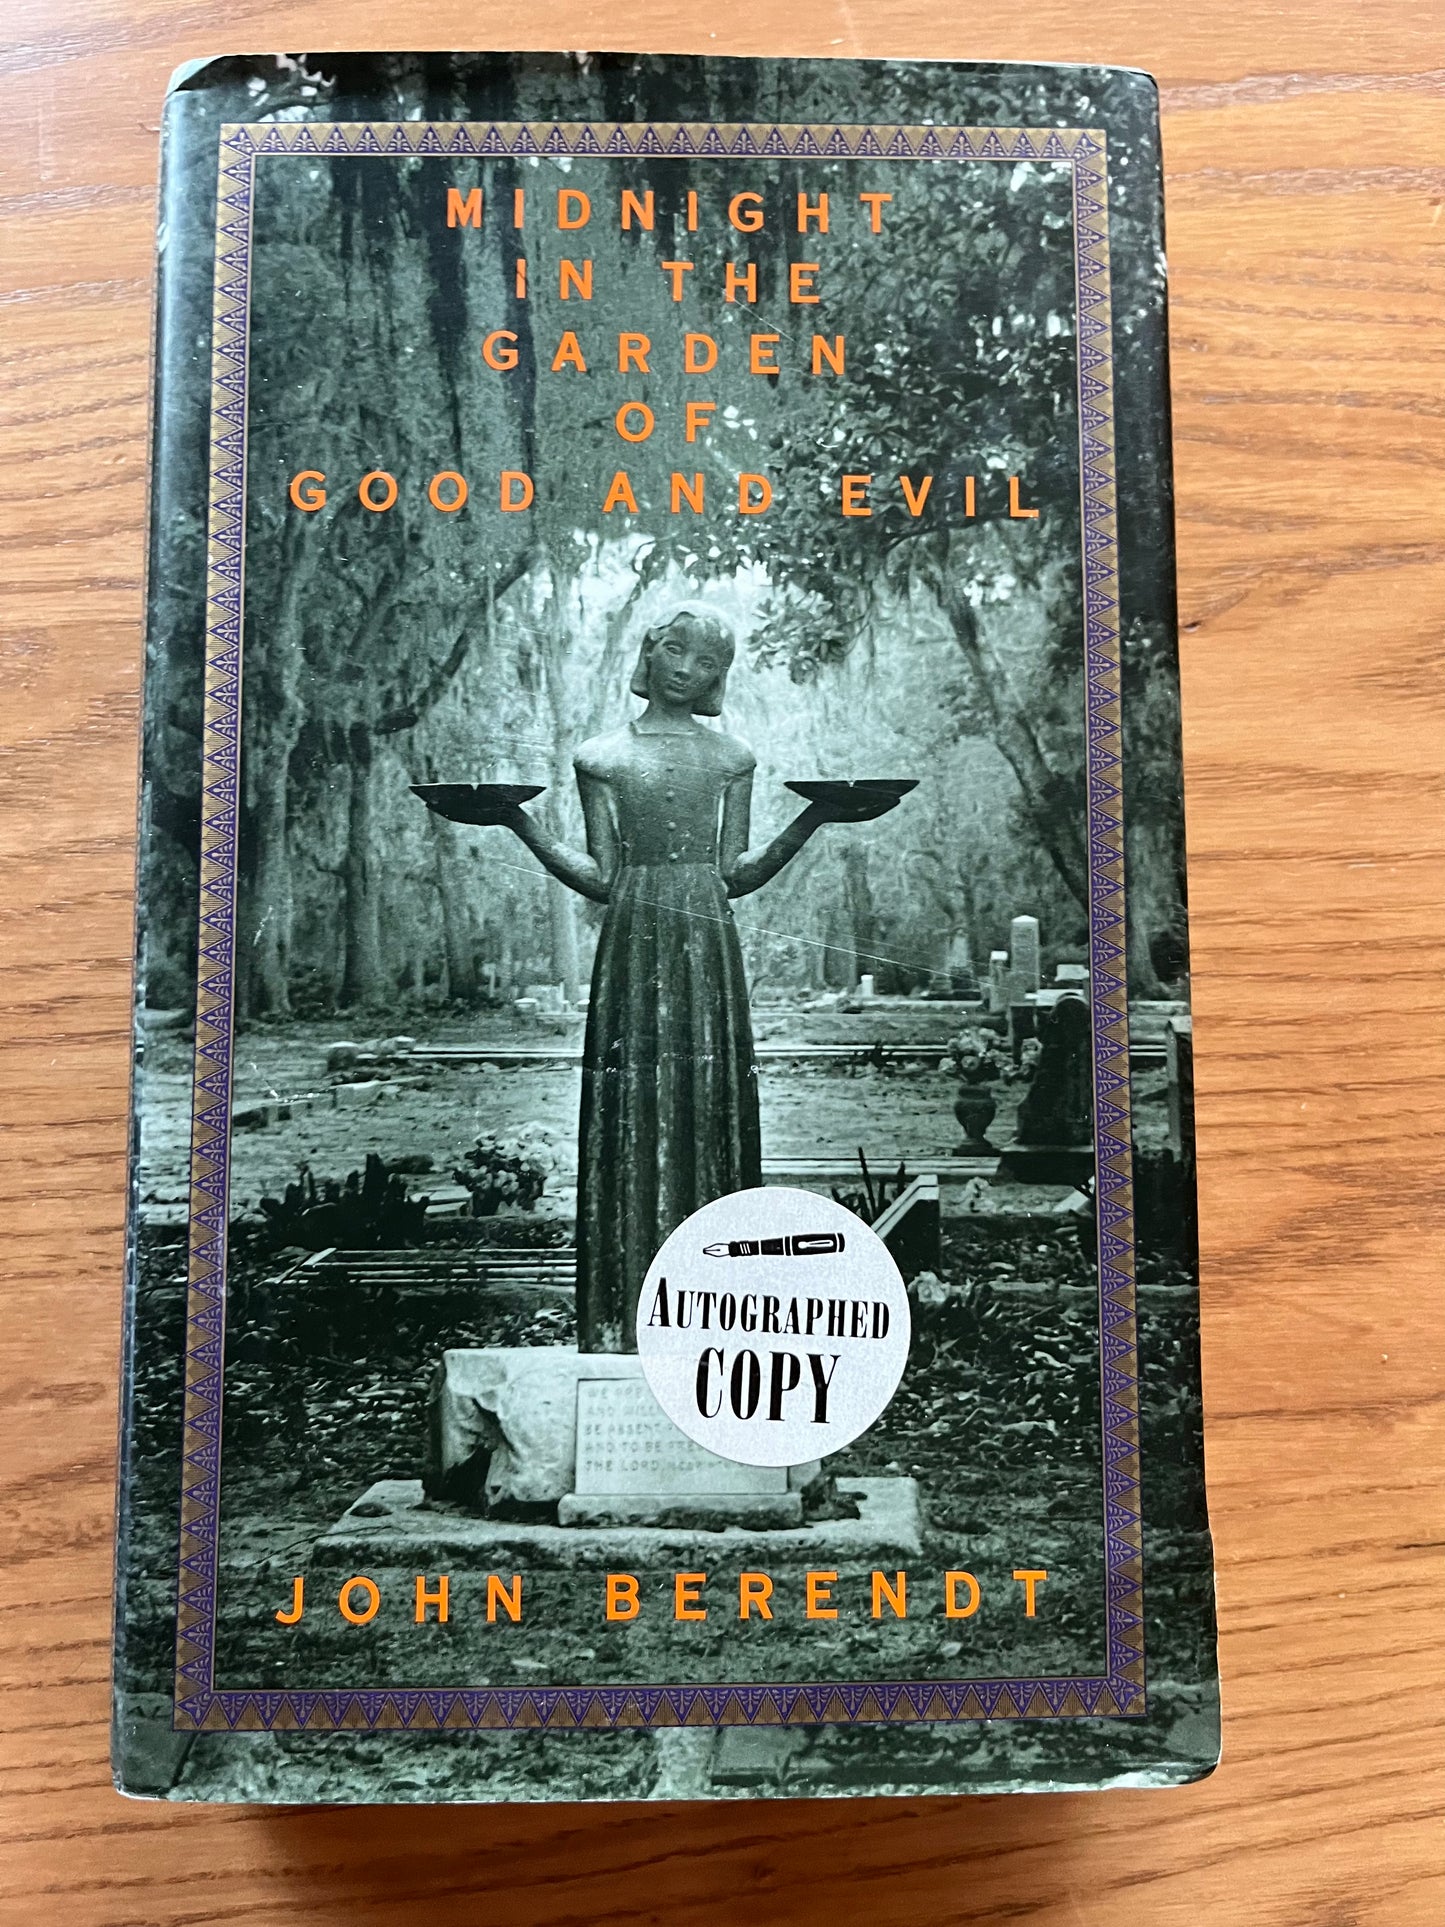 JOHN BERENDT, Midnight in the Garden of Good and Evil (autographed book)